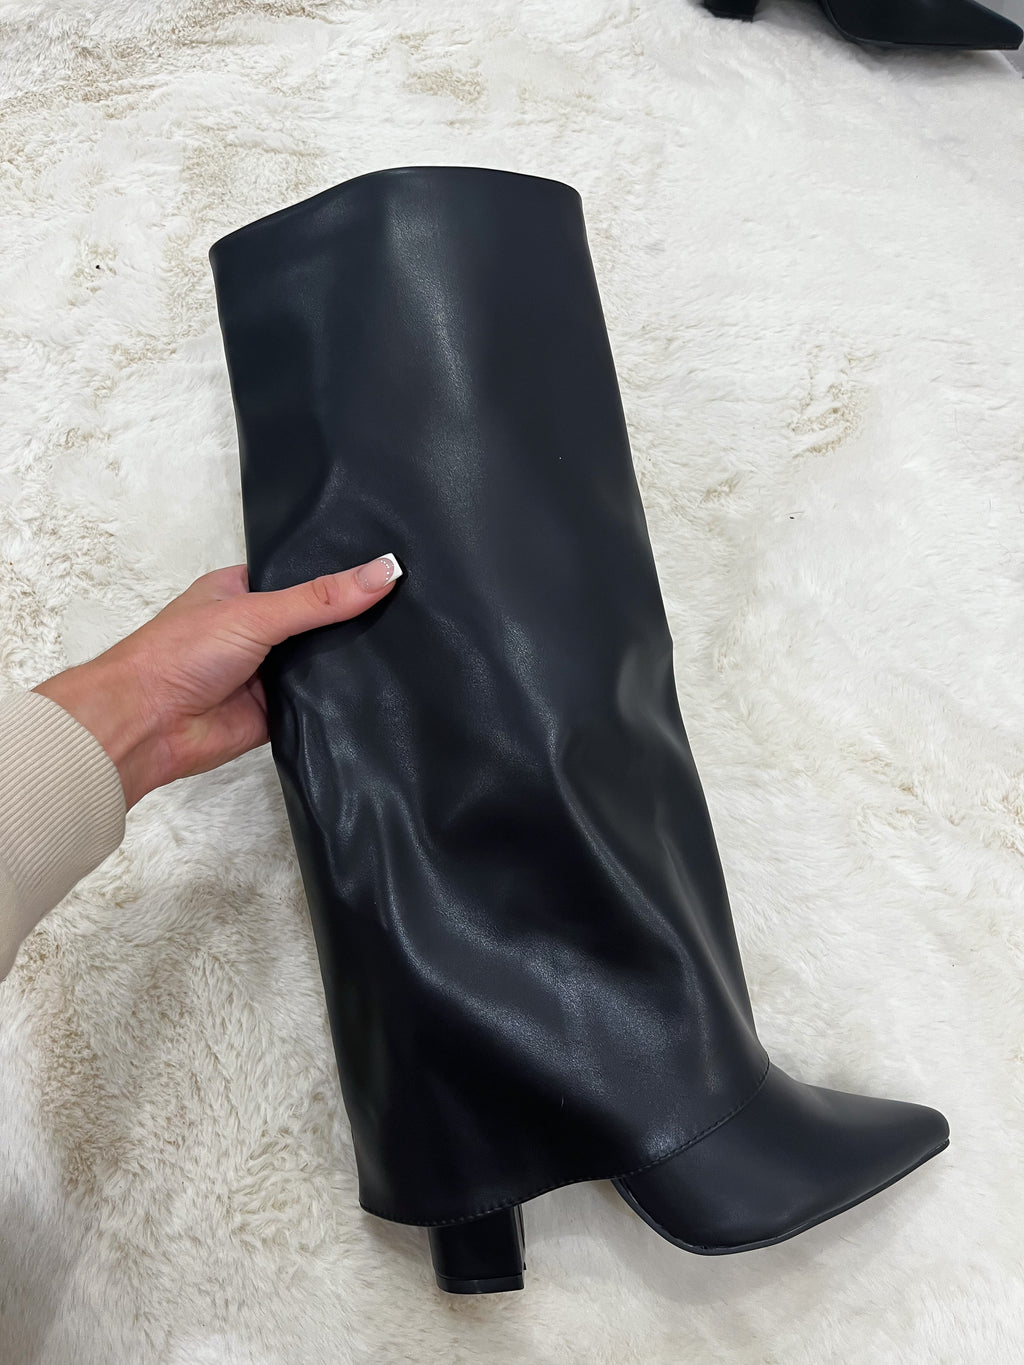 The ‘Emmie’ Fold Over Knee High Boots